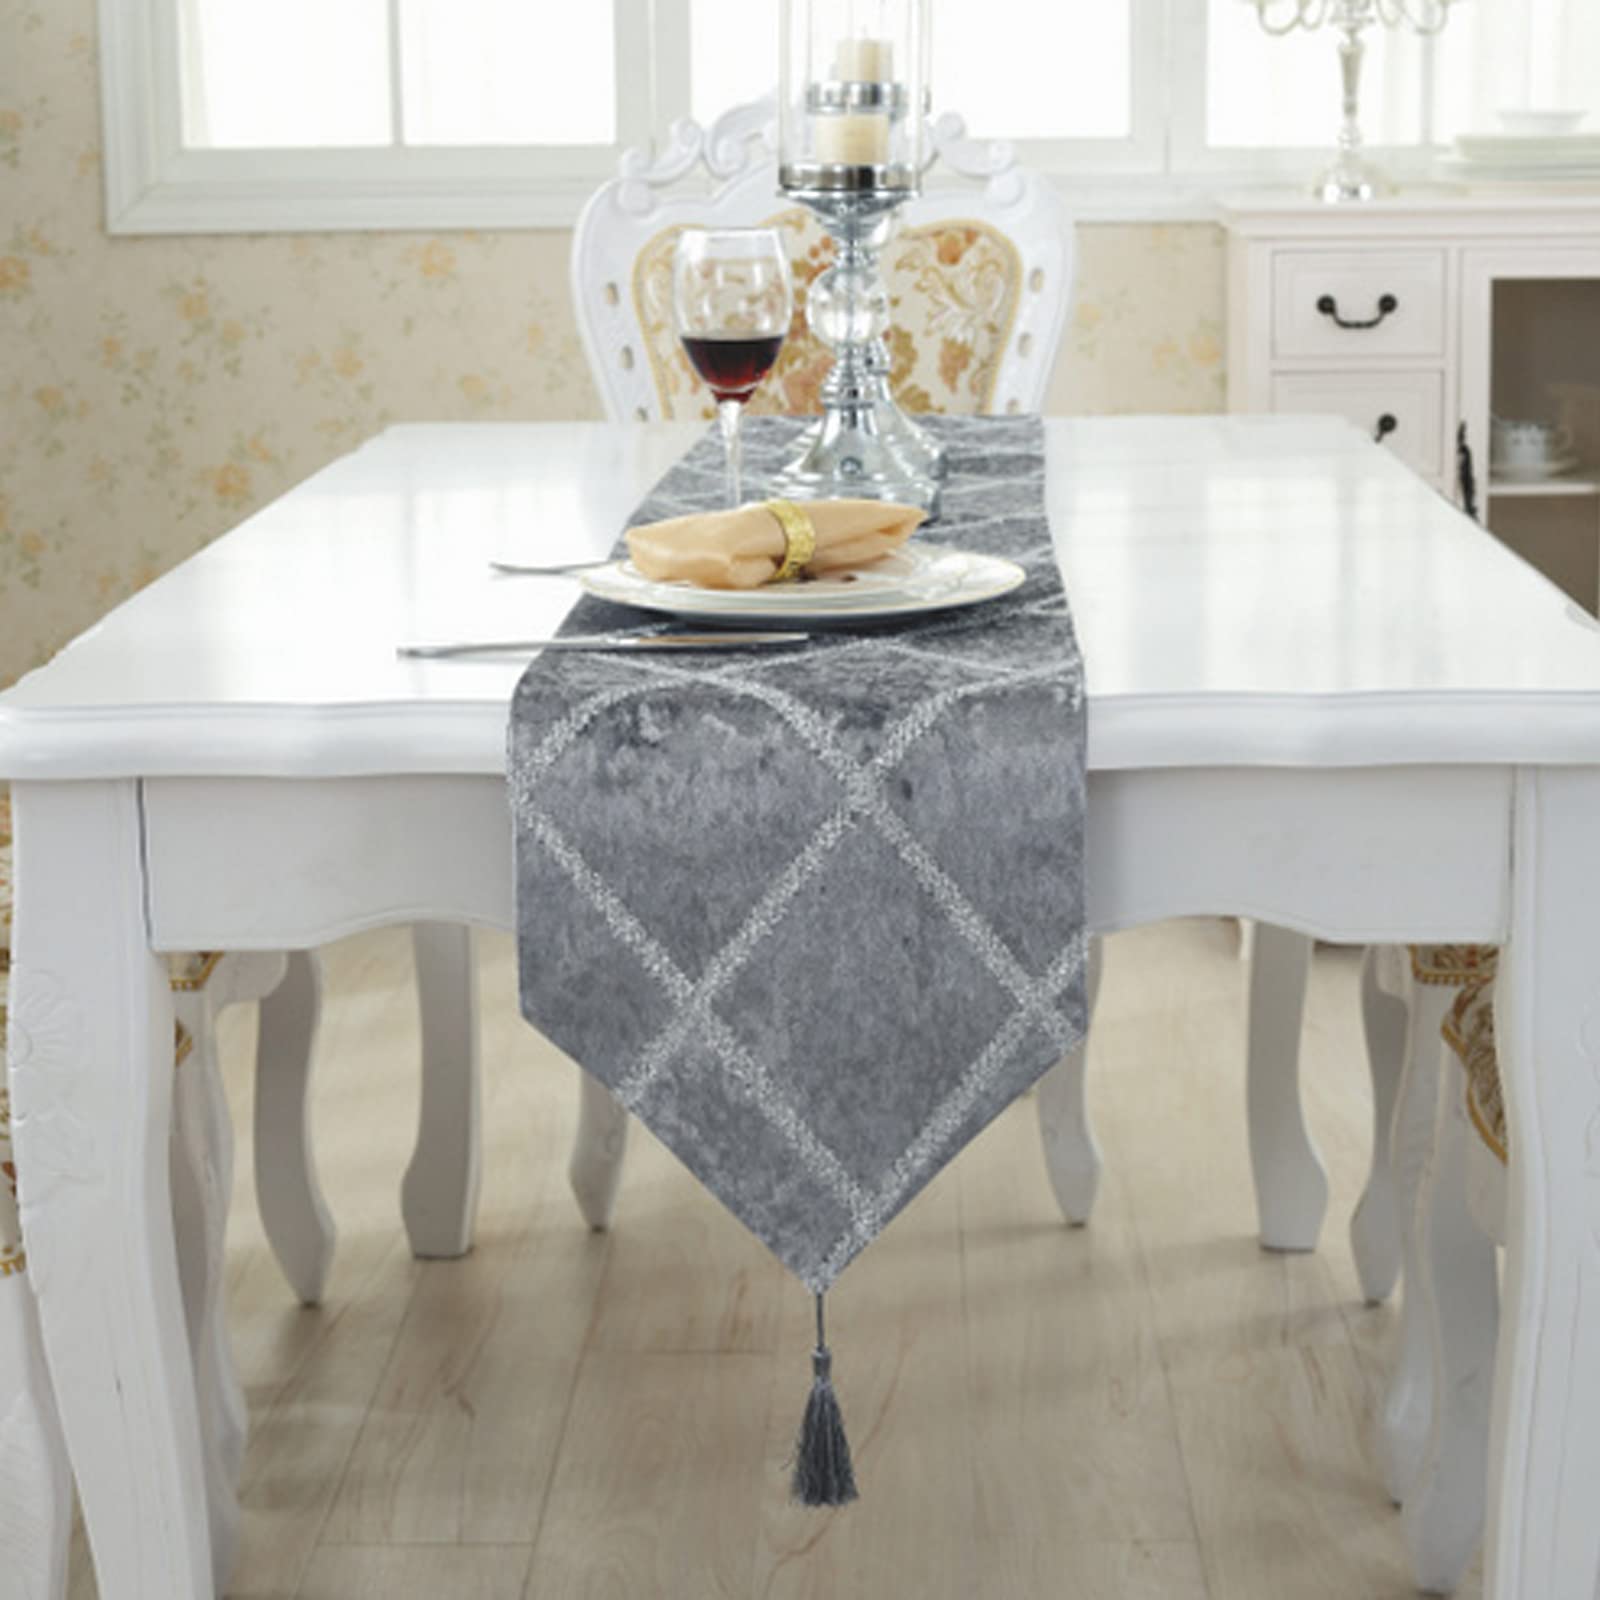 HCTX Grey Table Runner, Kitchen Washable Velvet Fabric Table Runner,Thick and smooth for Family Party or Gathering Dining Kitchen Restaurant Table Decoration(28x180cm)